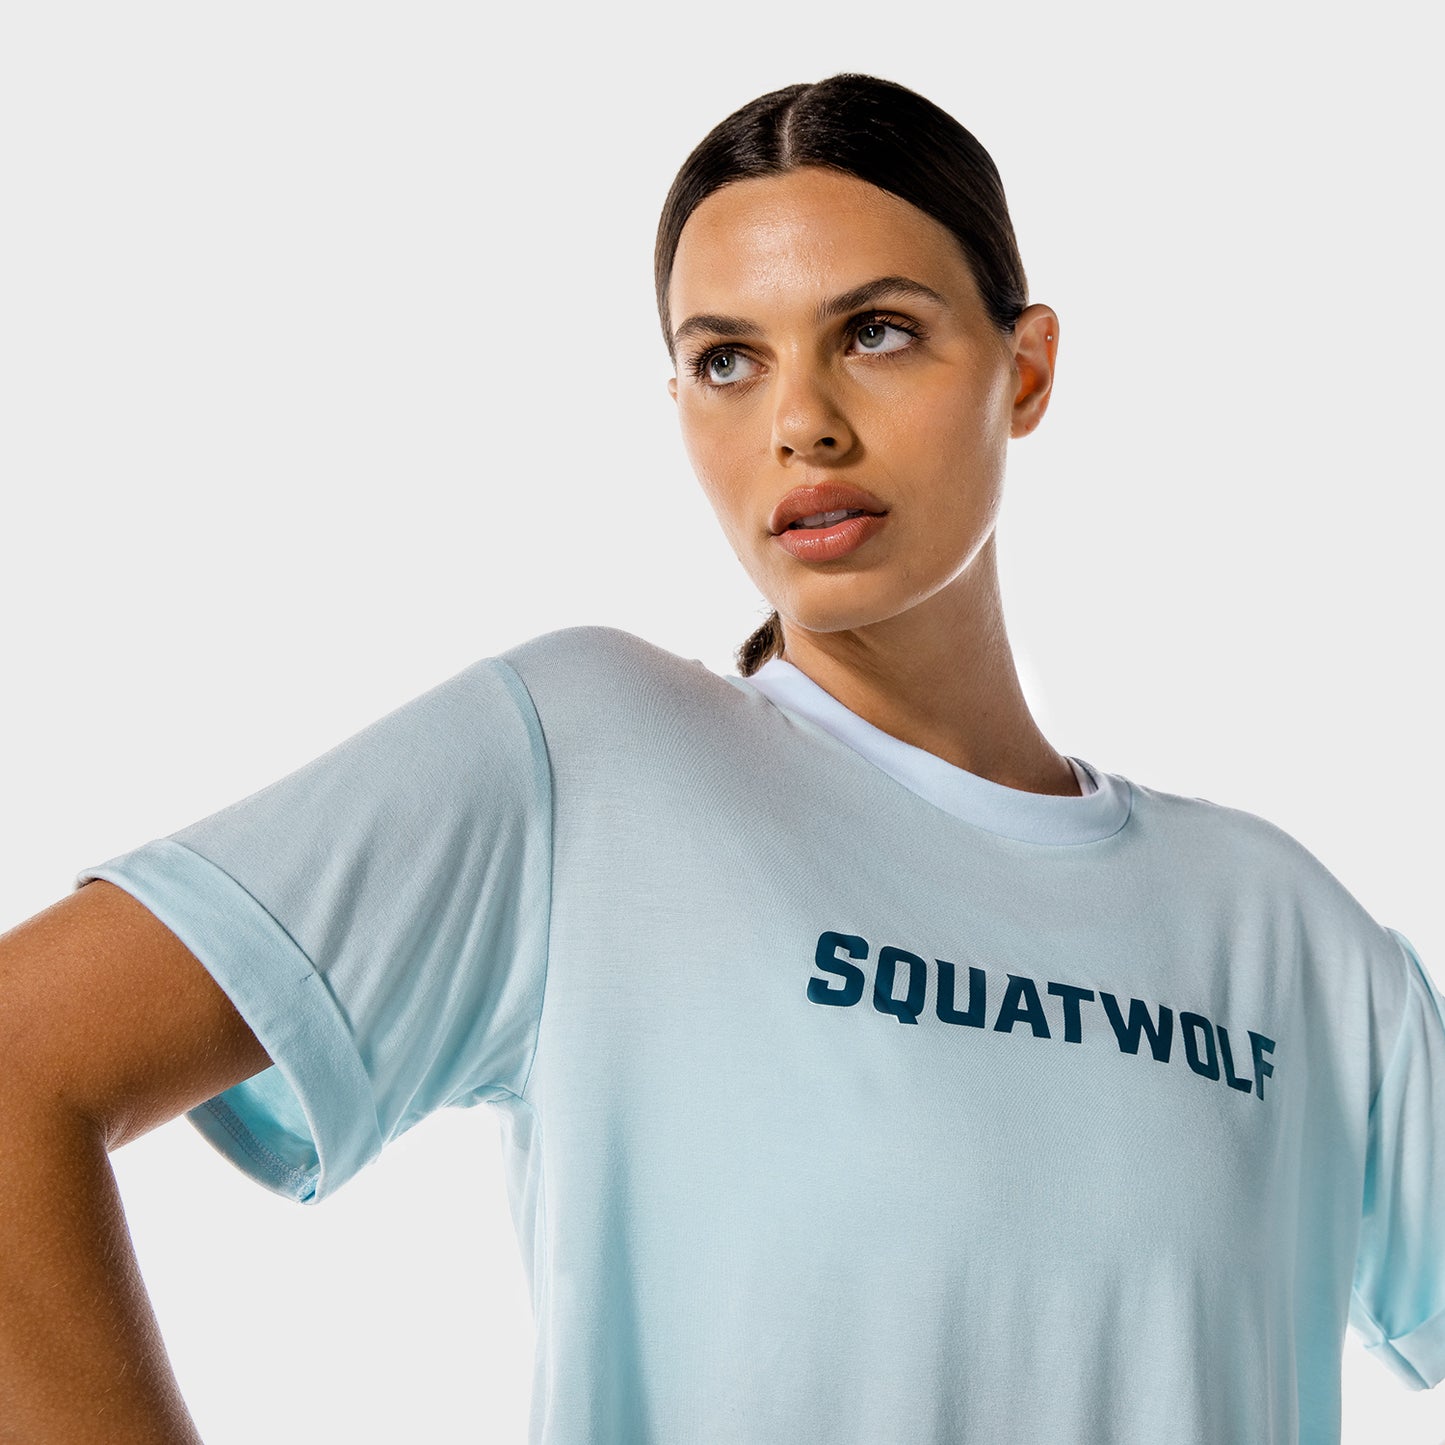 squatwolf-gym-t-shirts-for-women-iconic-crop-tee-blue-workout-clothes